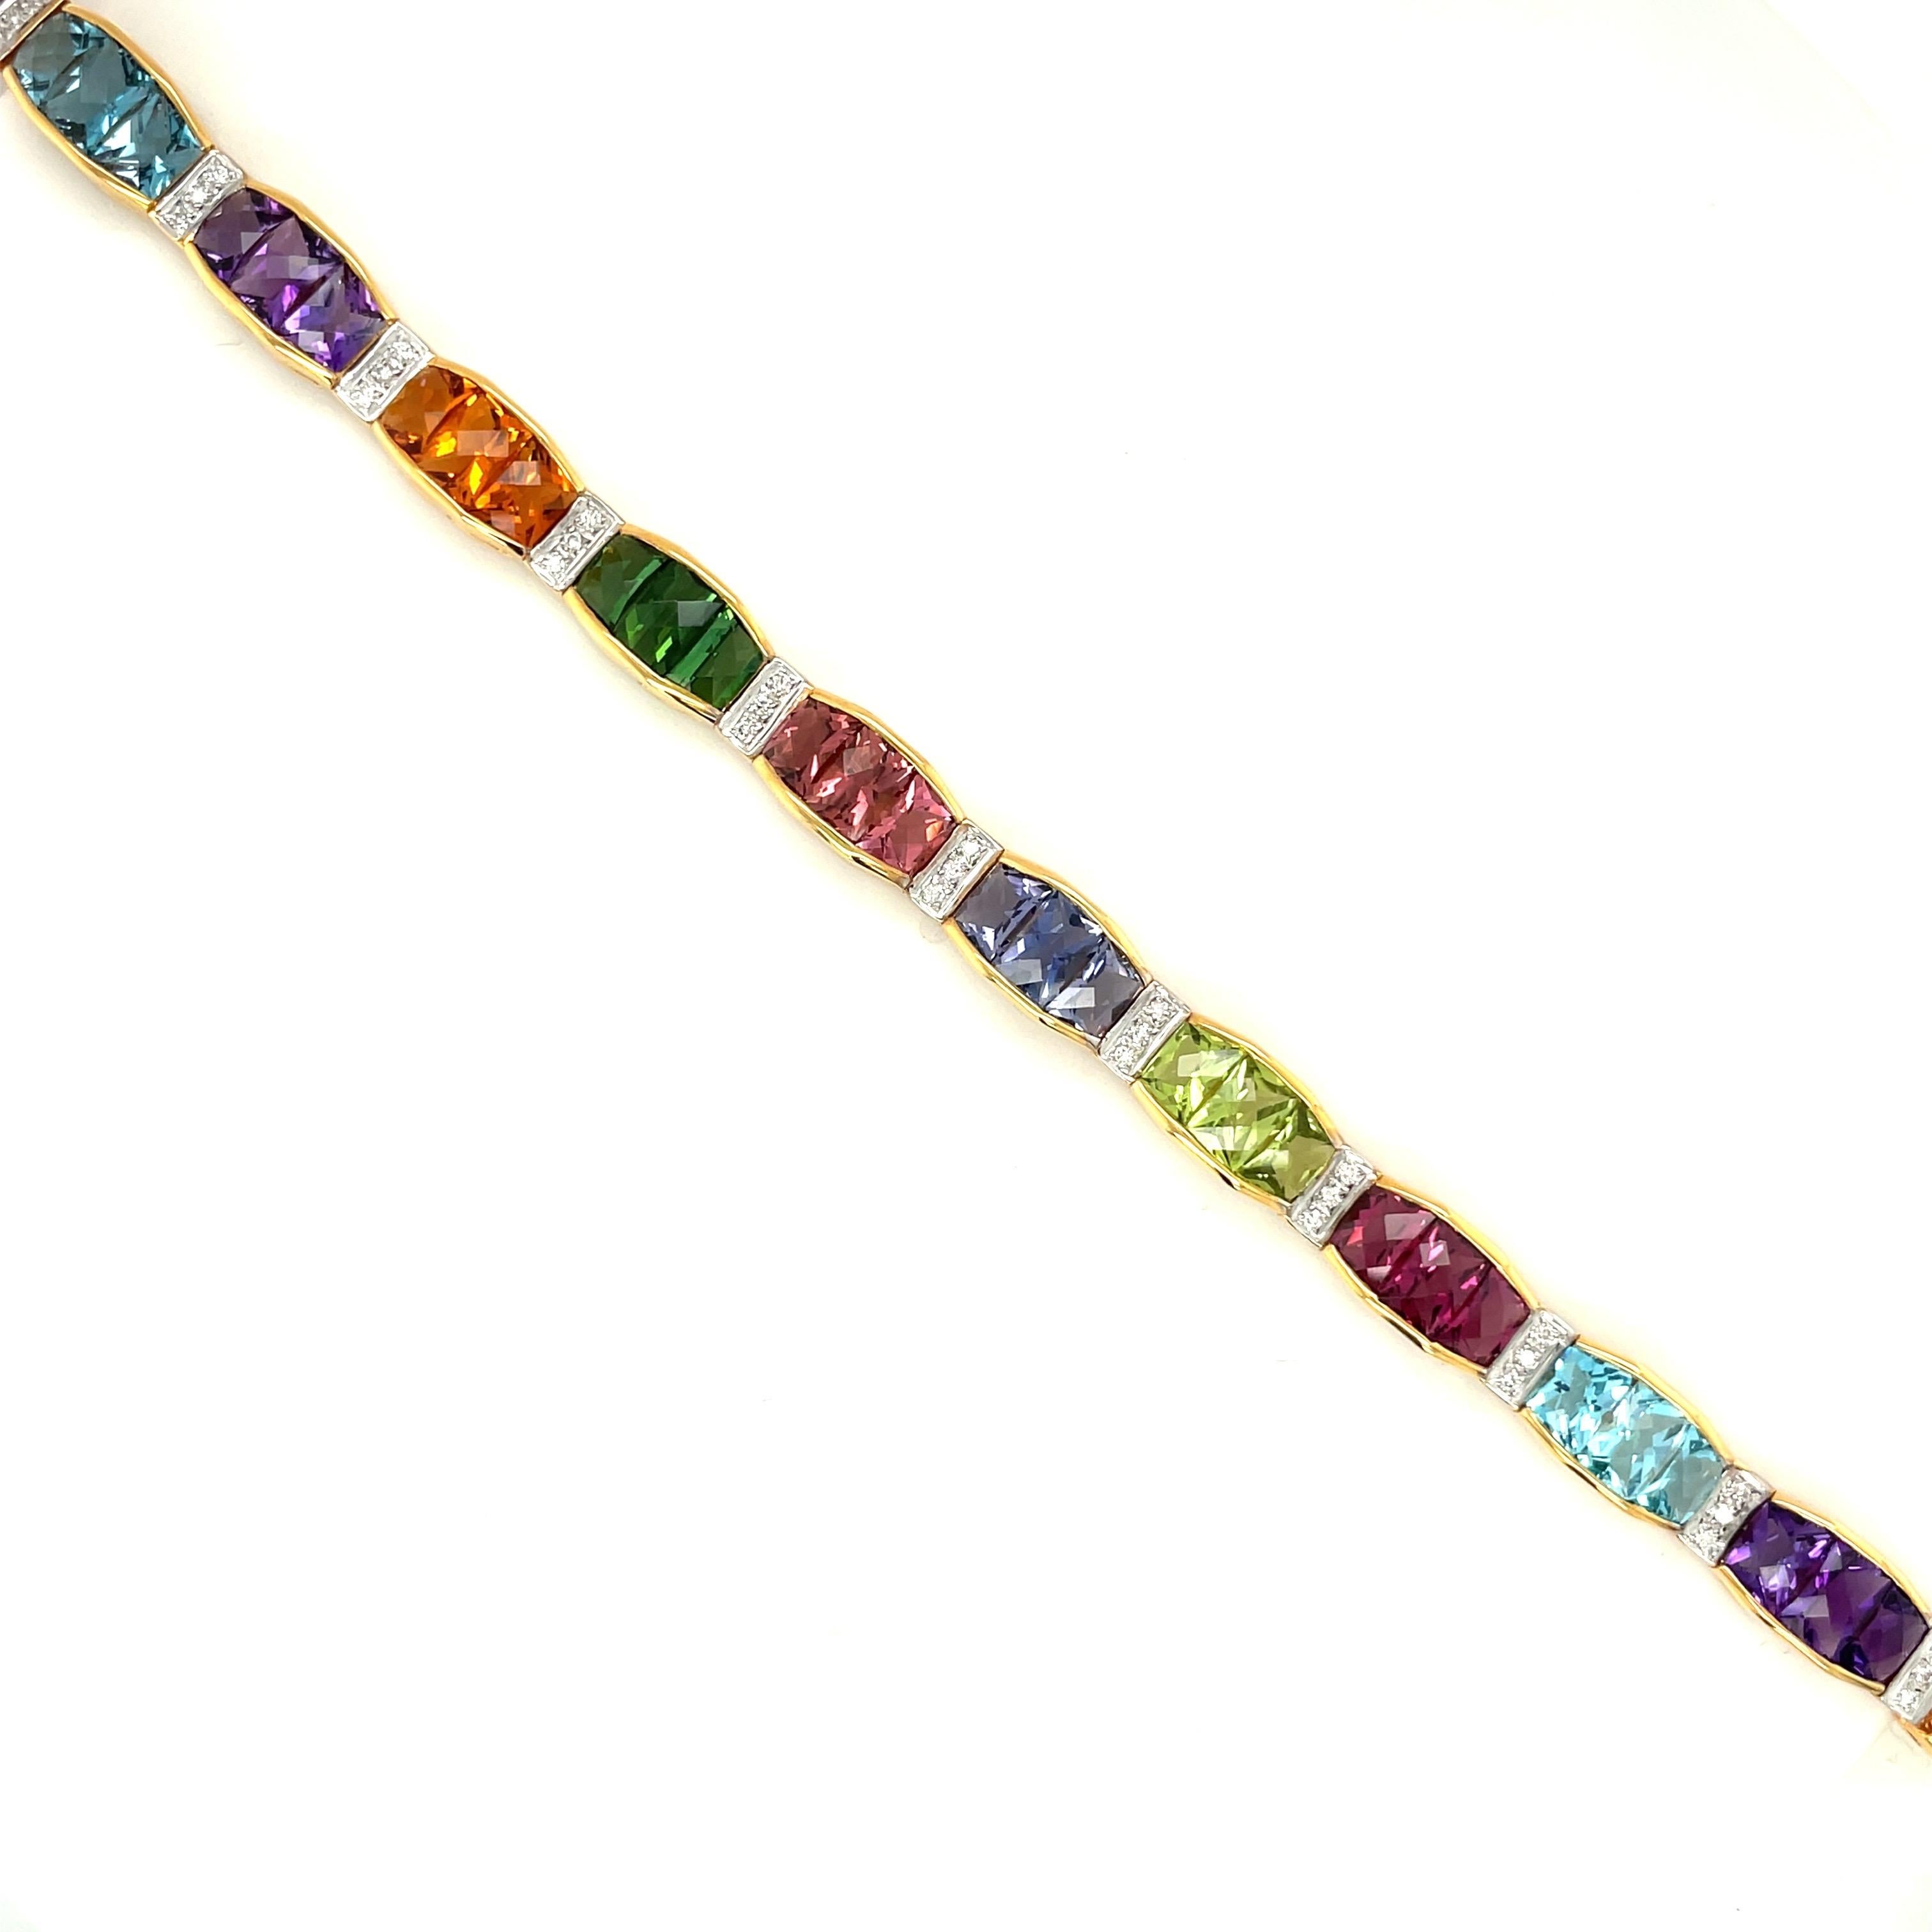 This colorful 18 karat yellow gold and semi precious stone bracelet is designed with 12 sections. Each section is set with 3 briolette cut stones. The semi precious stones are citrine, garnnet, blue topaz, iolite, amethyst, pink and green